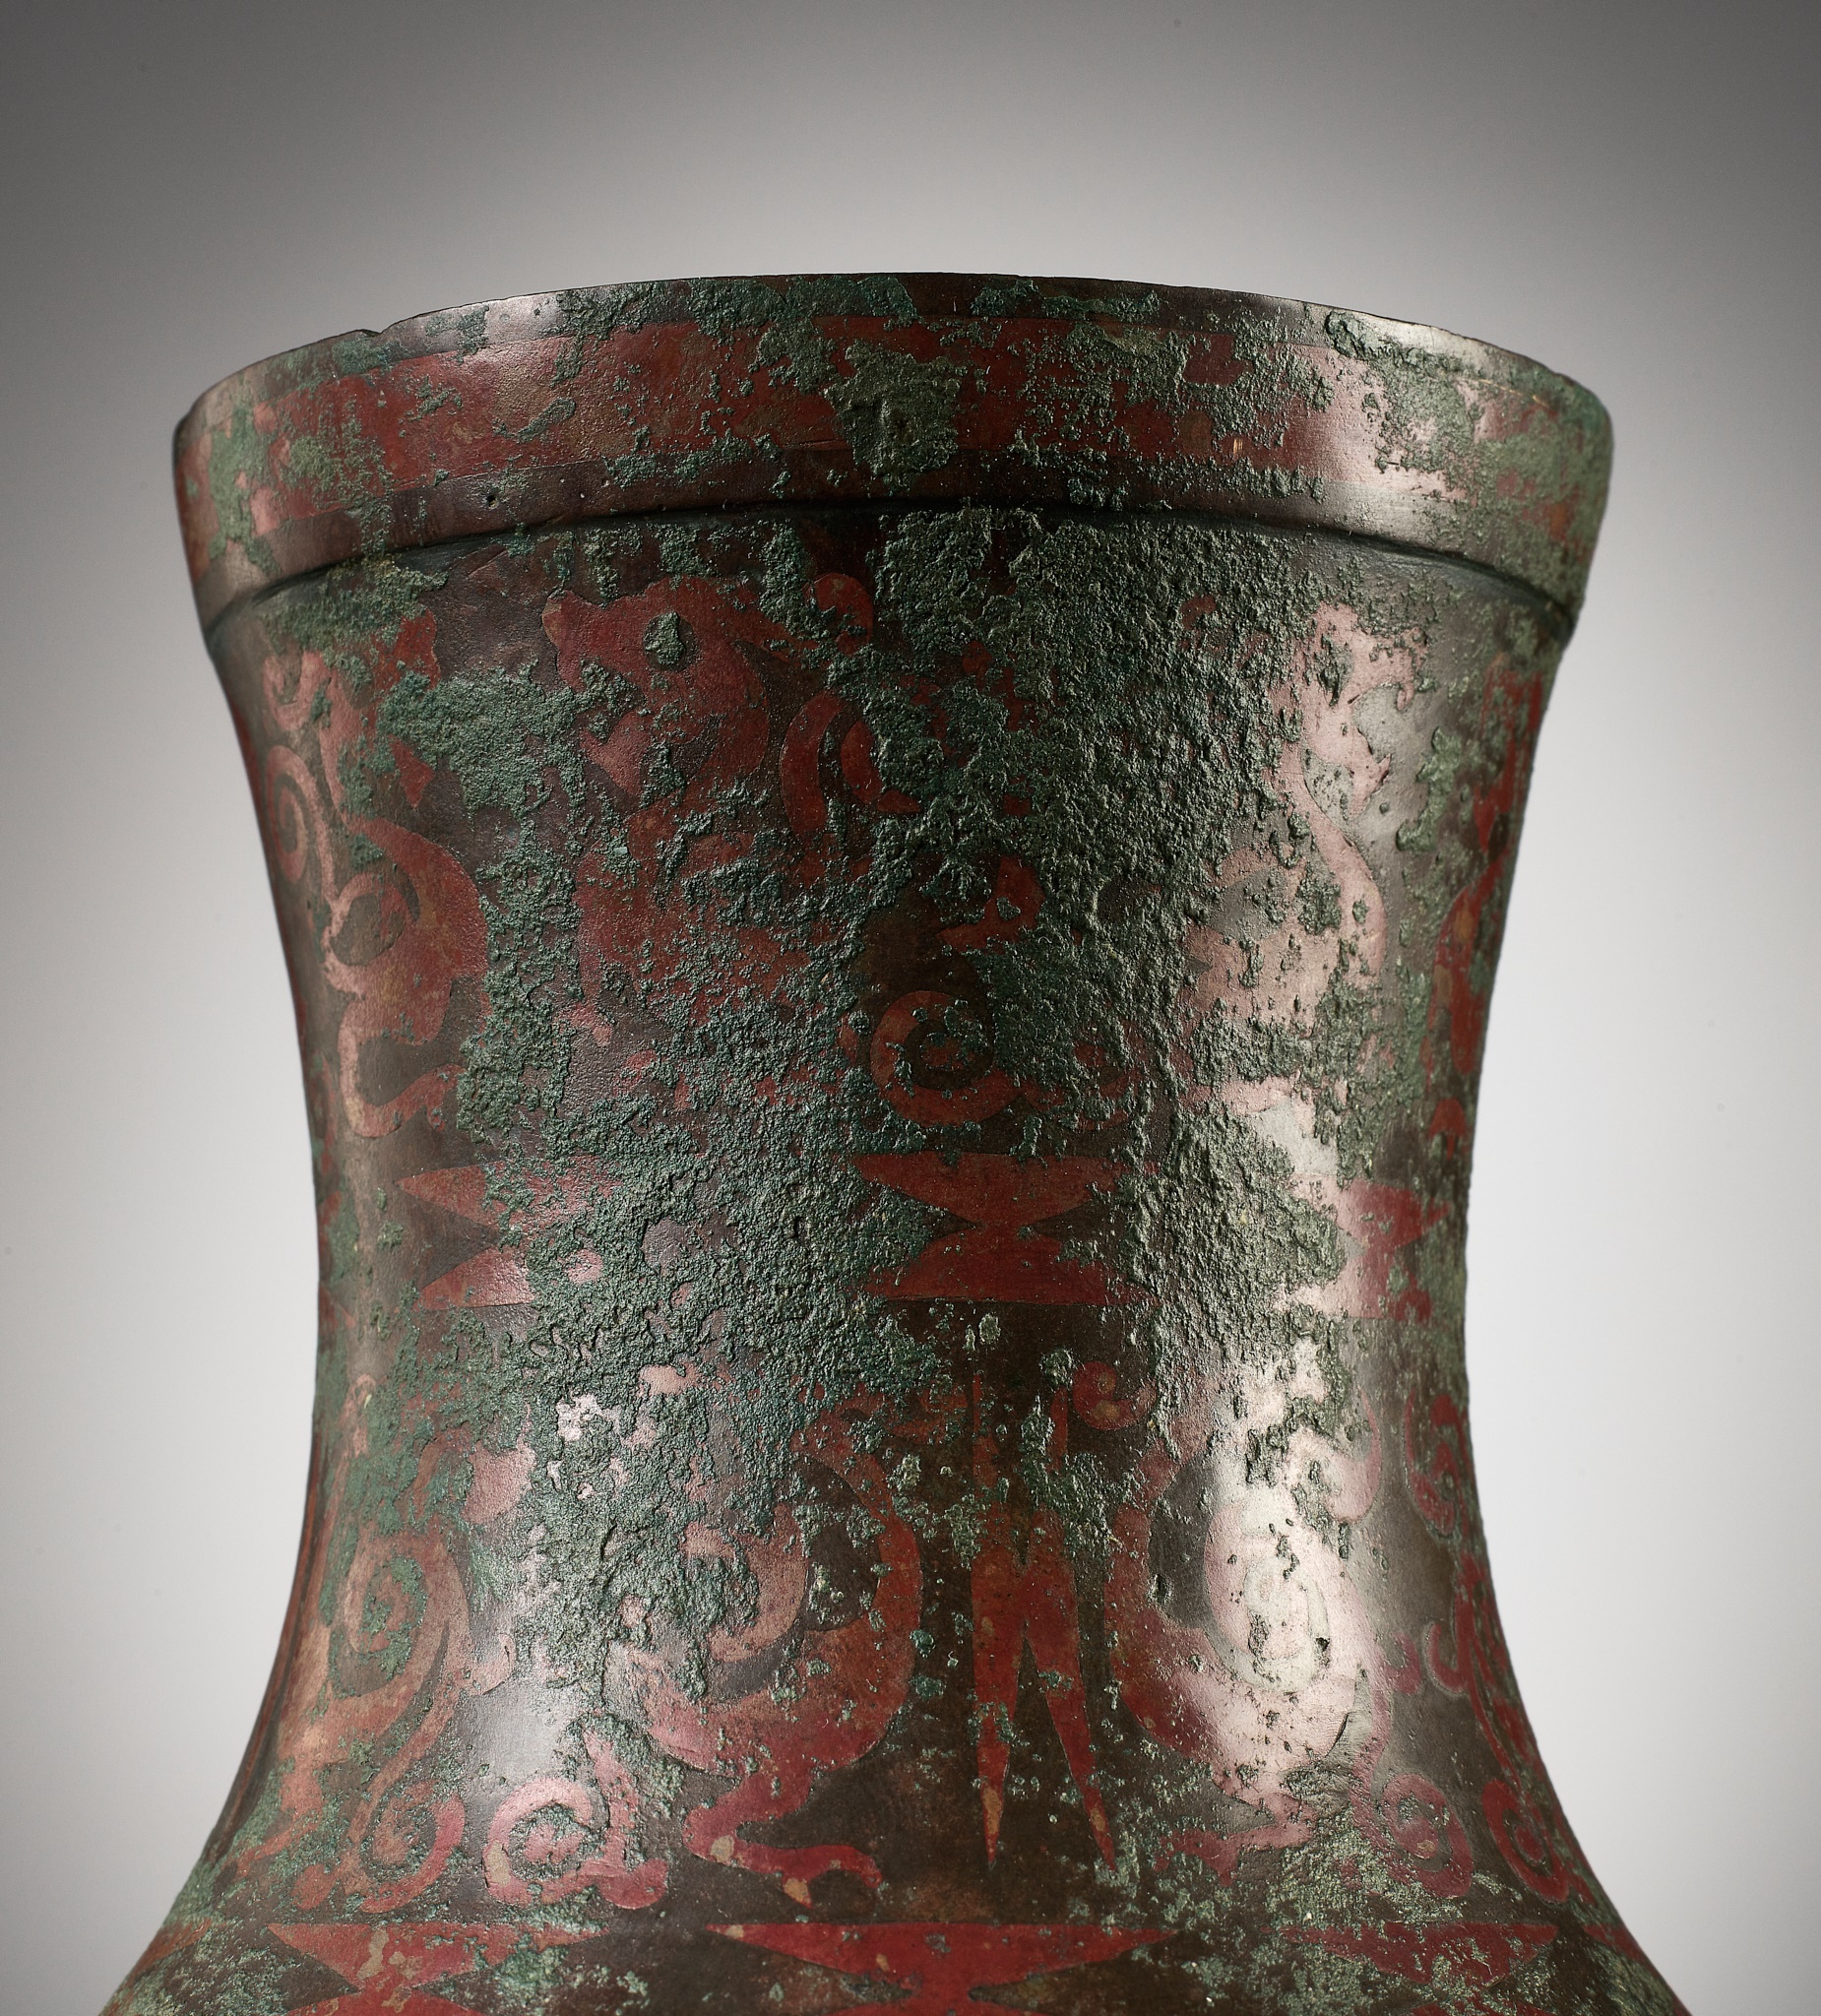 A COPPER-INLAID BRONZE RITUAL WINE VESSEL AND COVER, HU, EASTERN ZHOU DYNASTY - Image 6 of 27